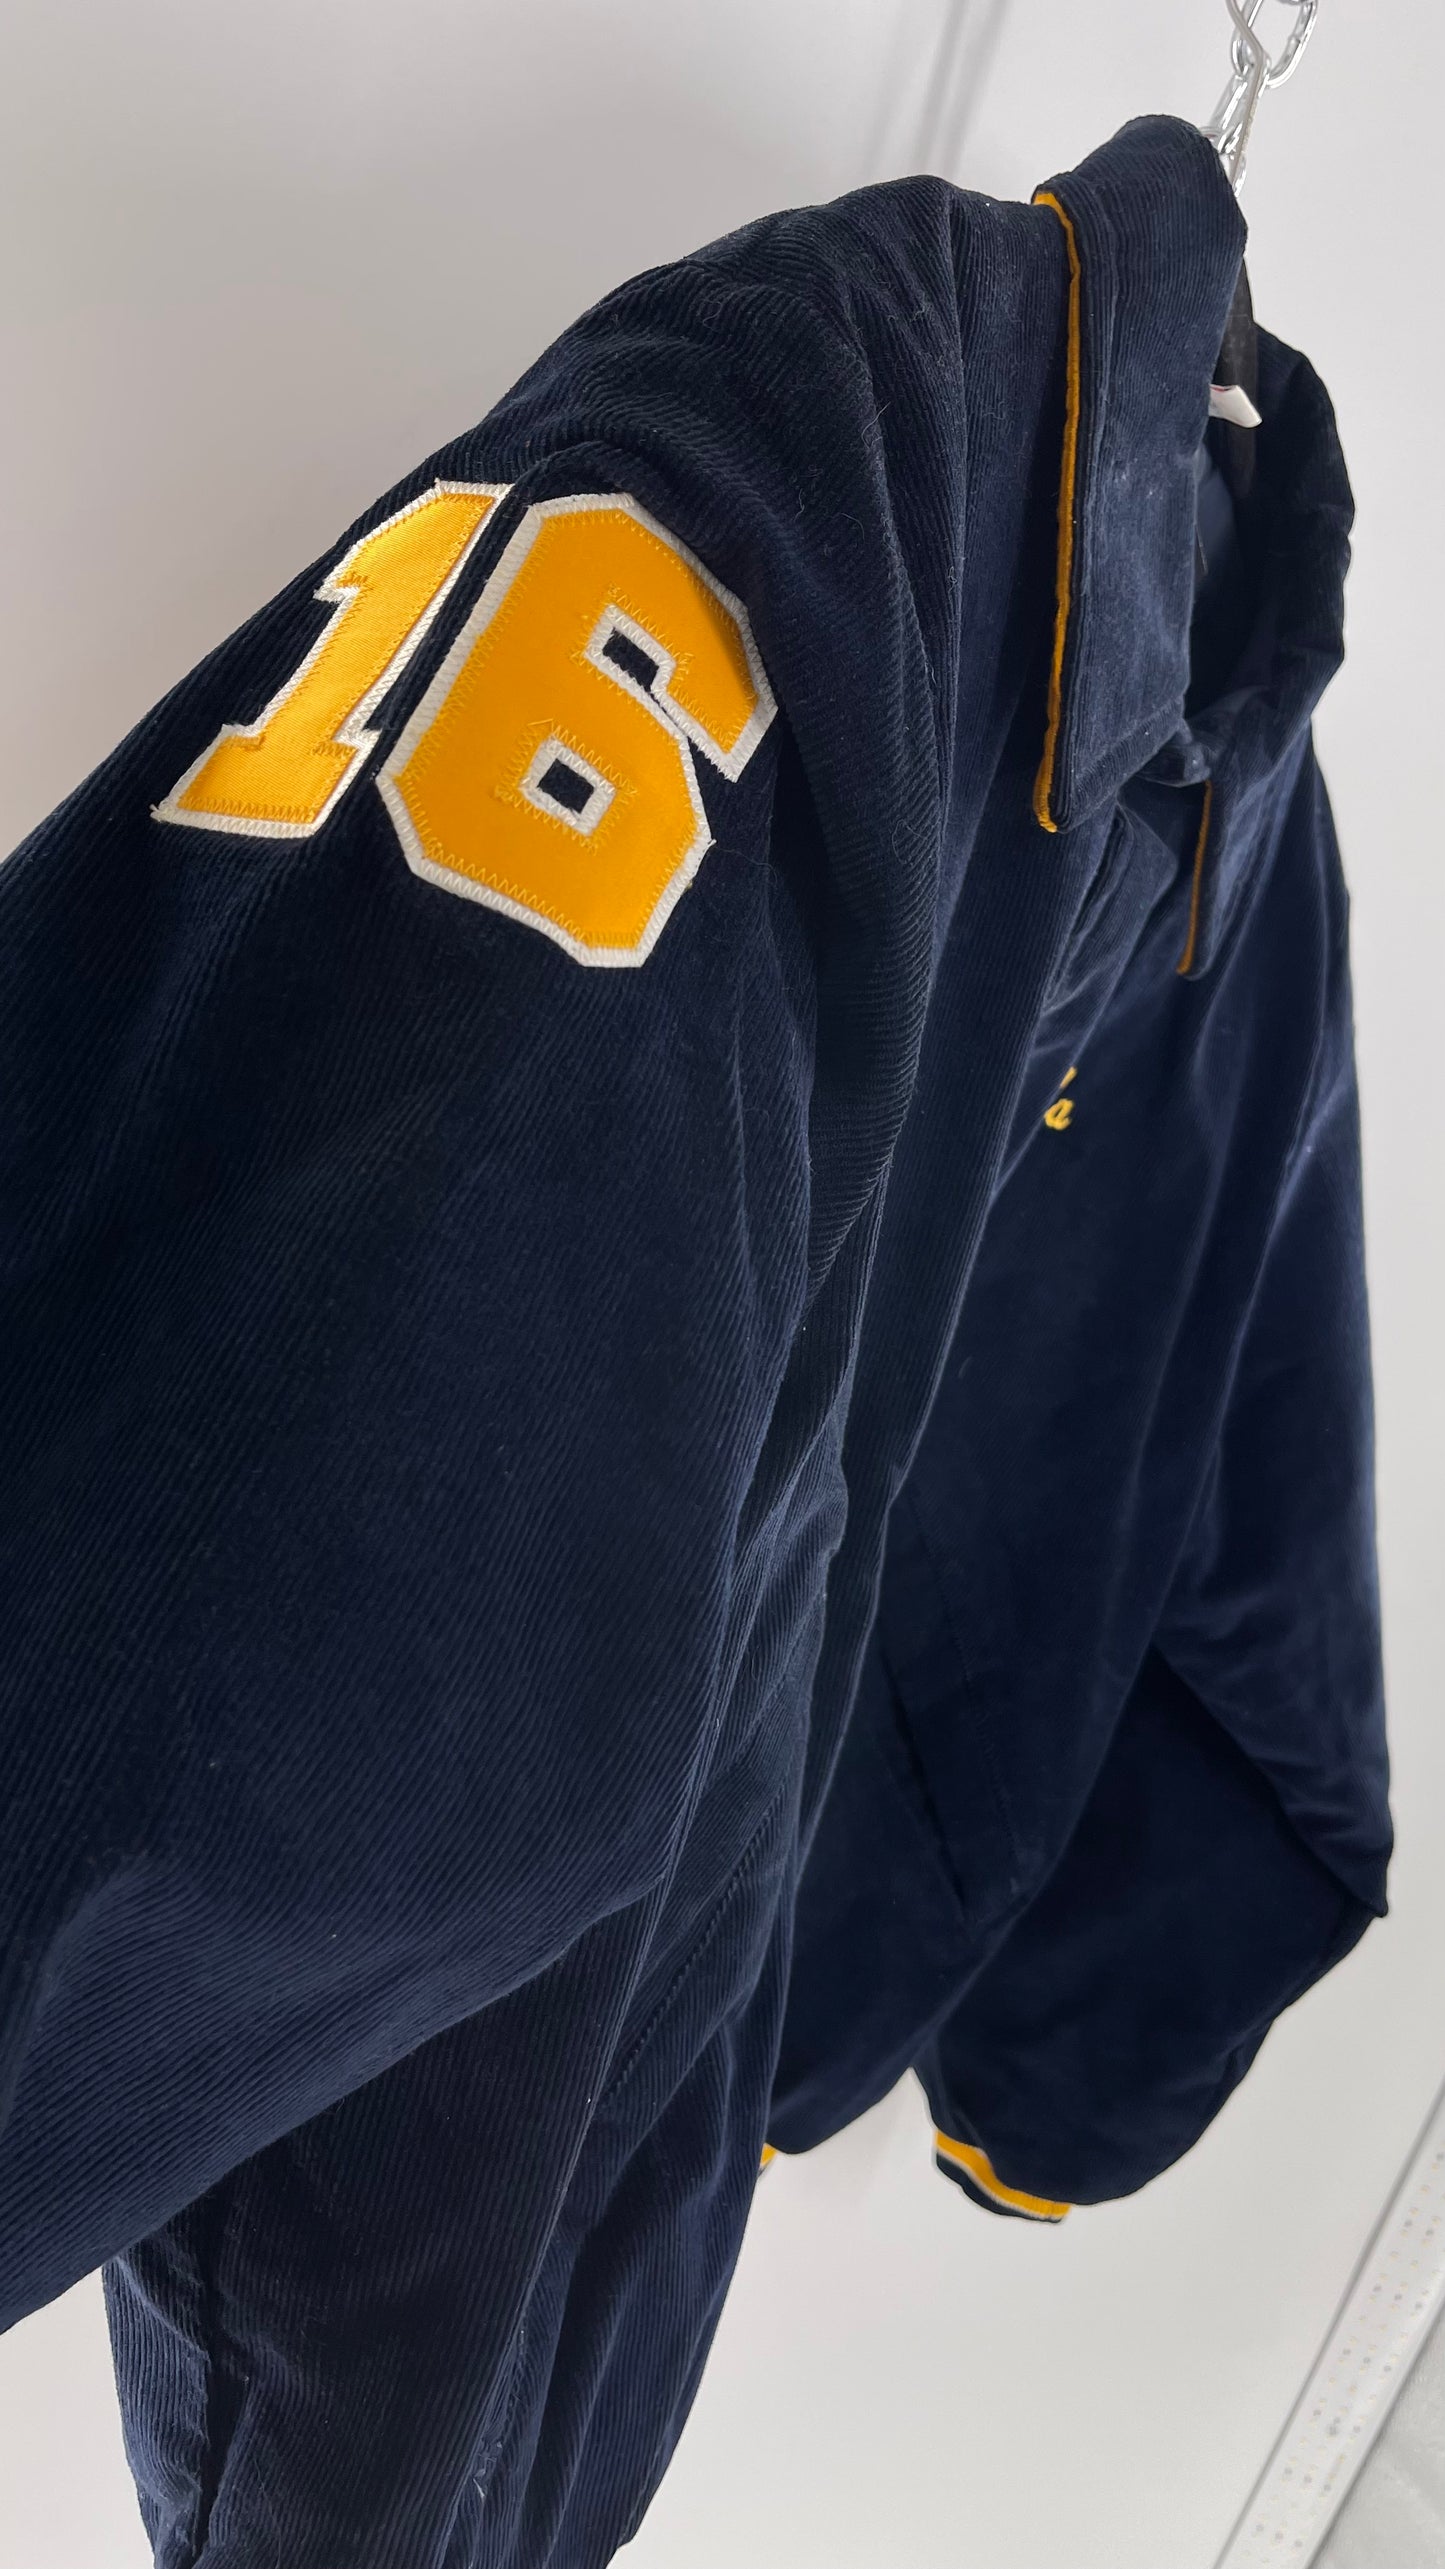 Birdie Vintage Phi Sigma Sigma Navy Blue Corduroy Varsity/Sorority Jacket with Contrast Yellow Patches and Embroidered “Paula” Monogram (Large)